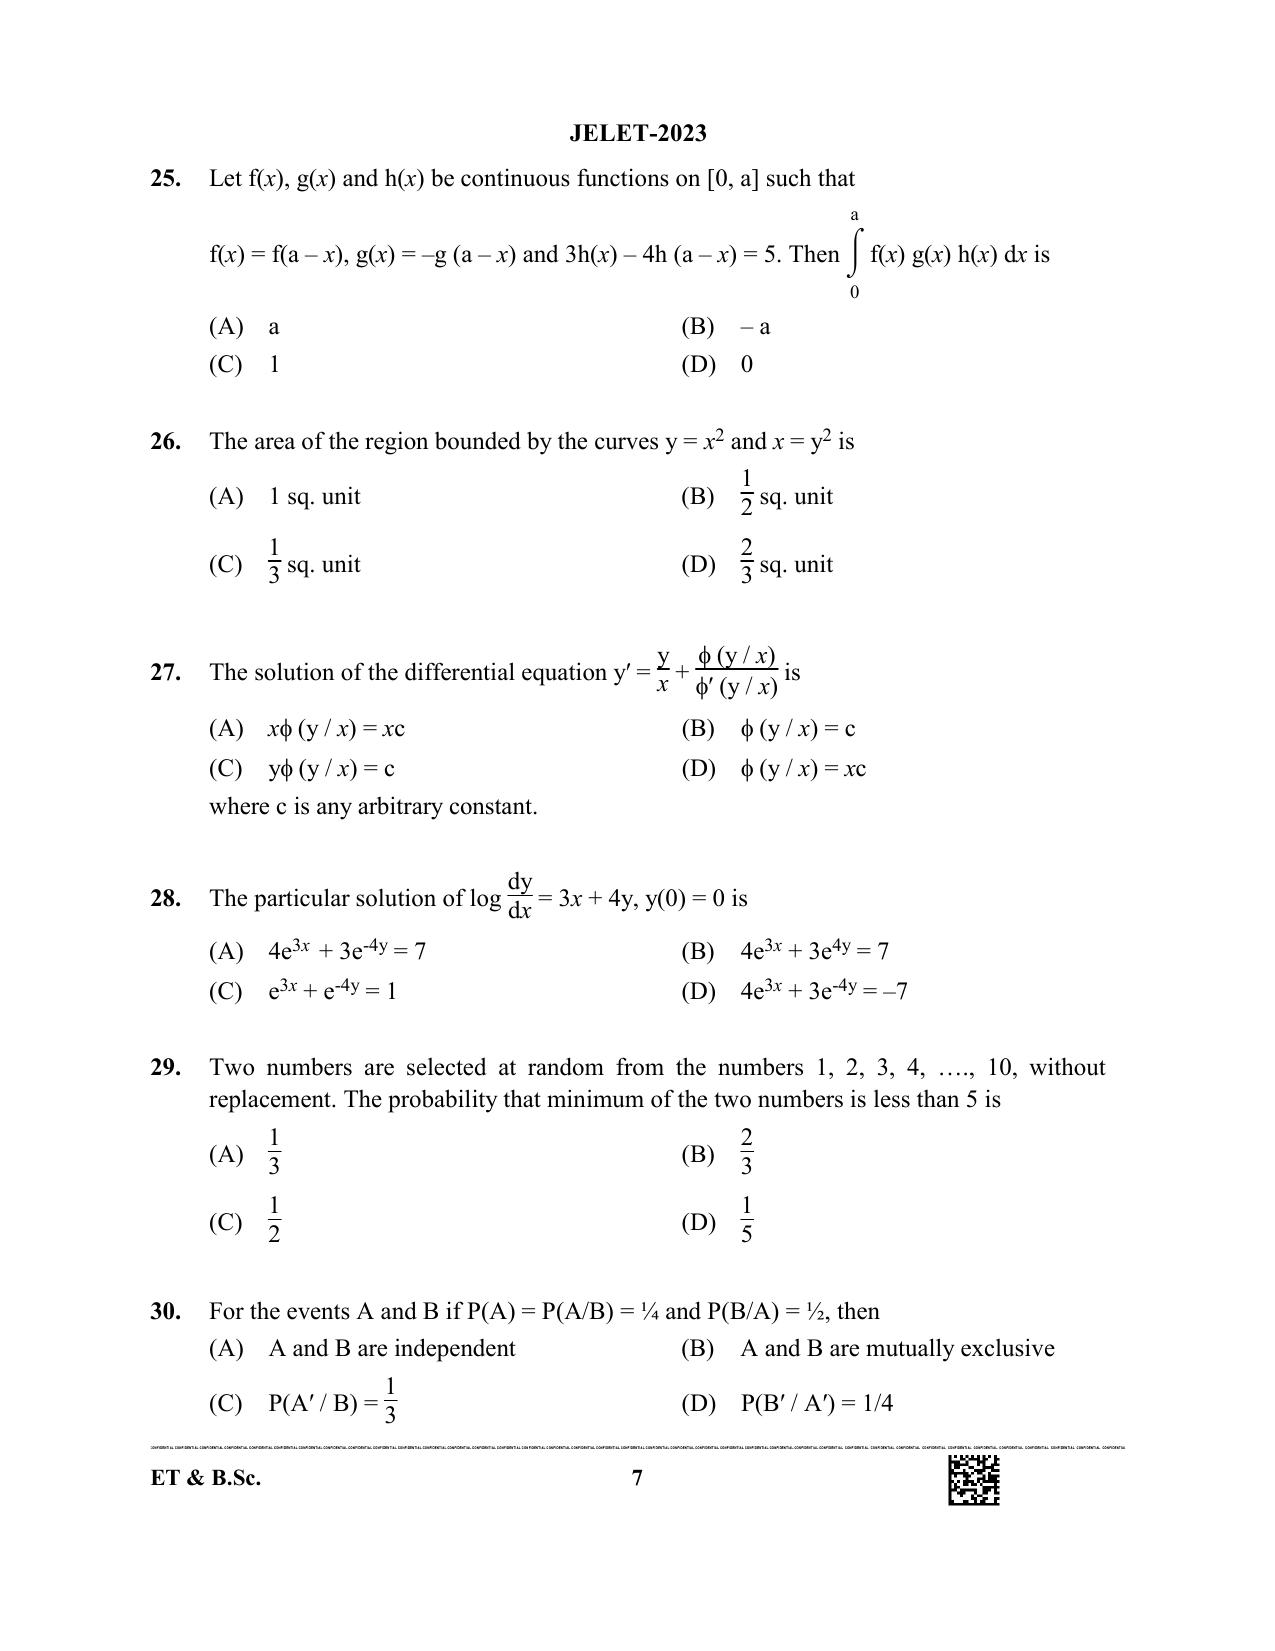 WBJEE JELET 2023 Paper I (ET & BSC) Question Papers - Page 7